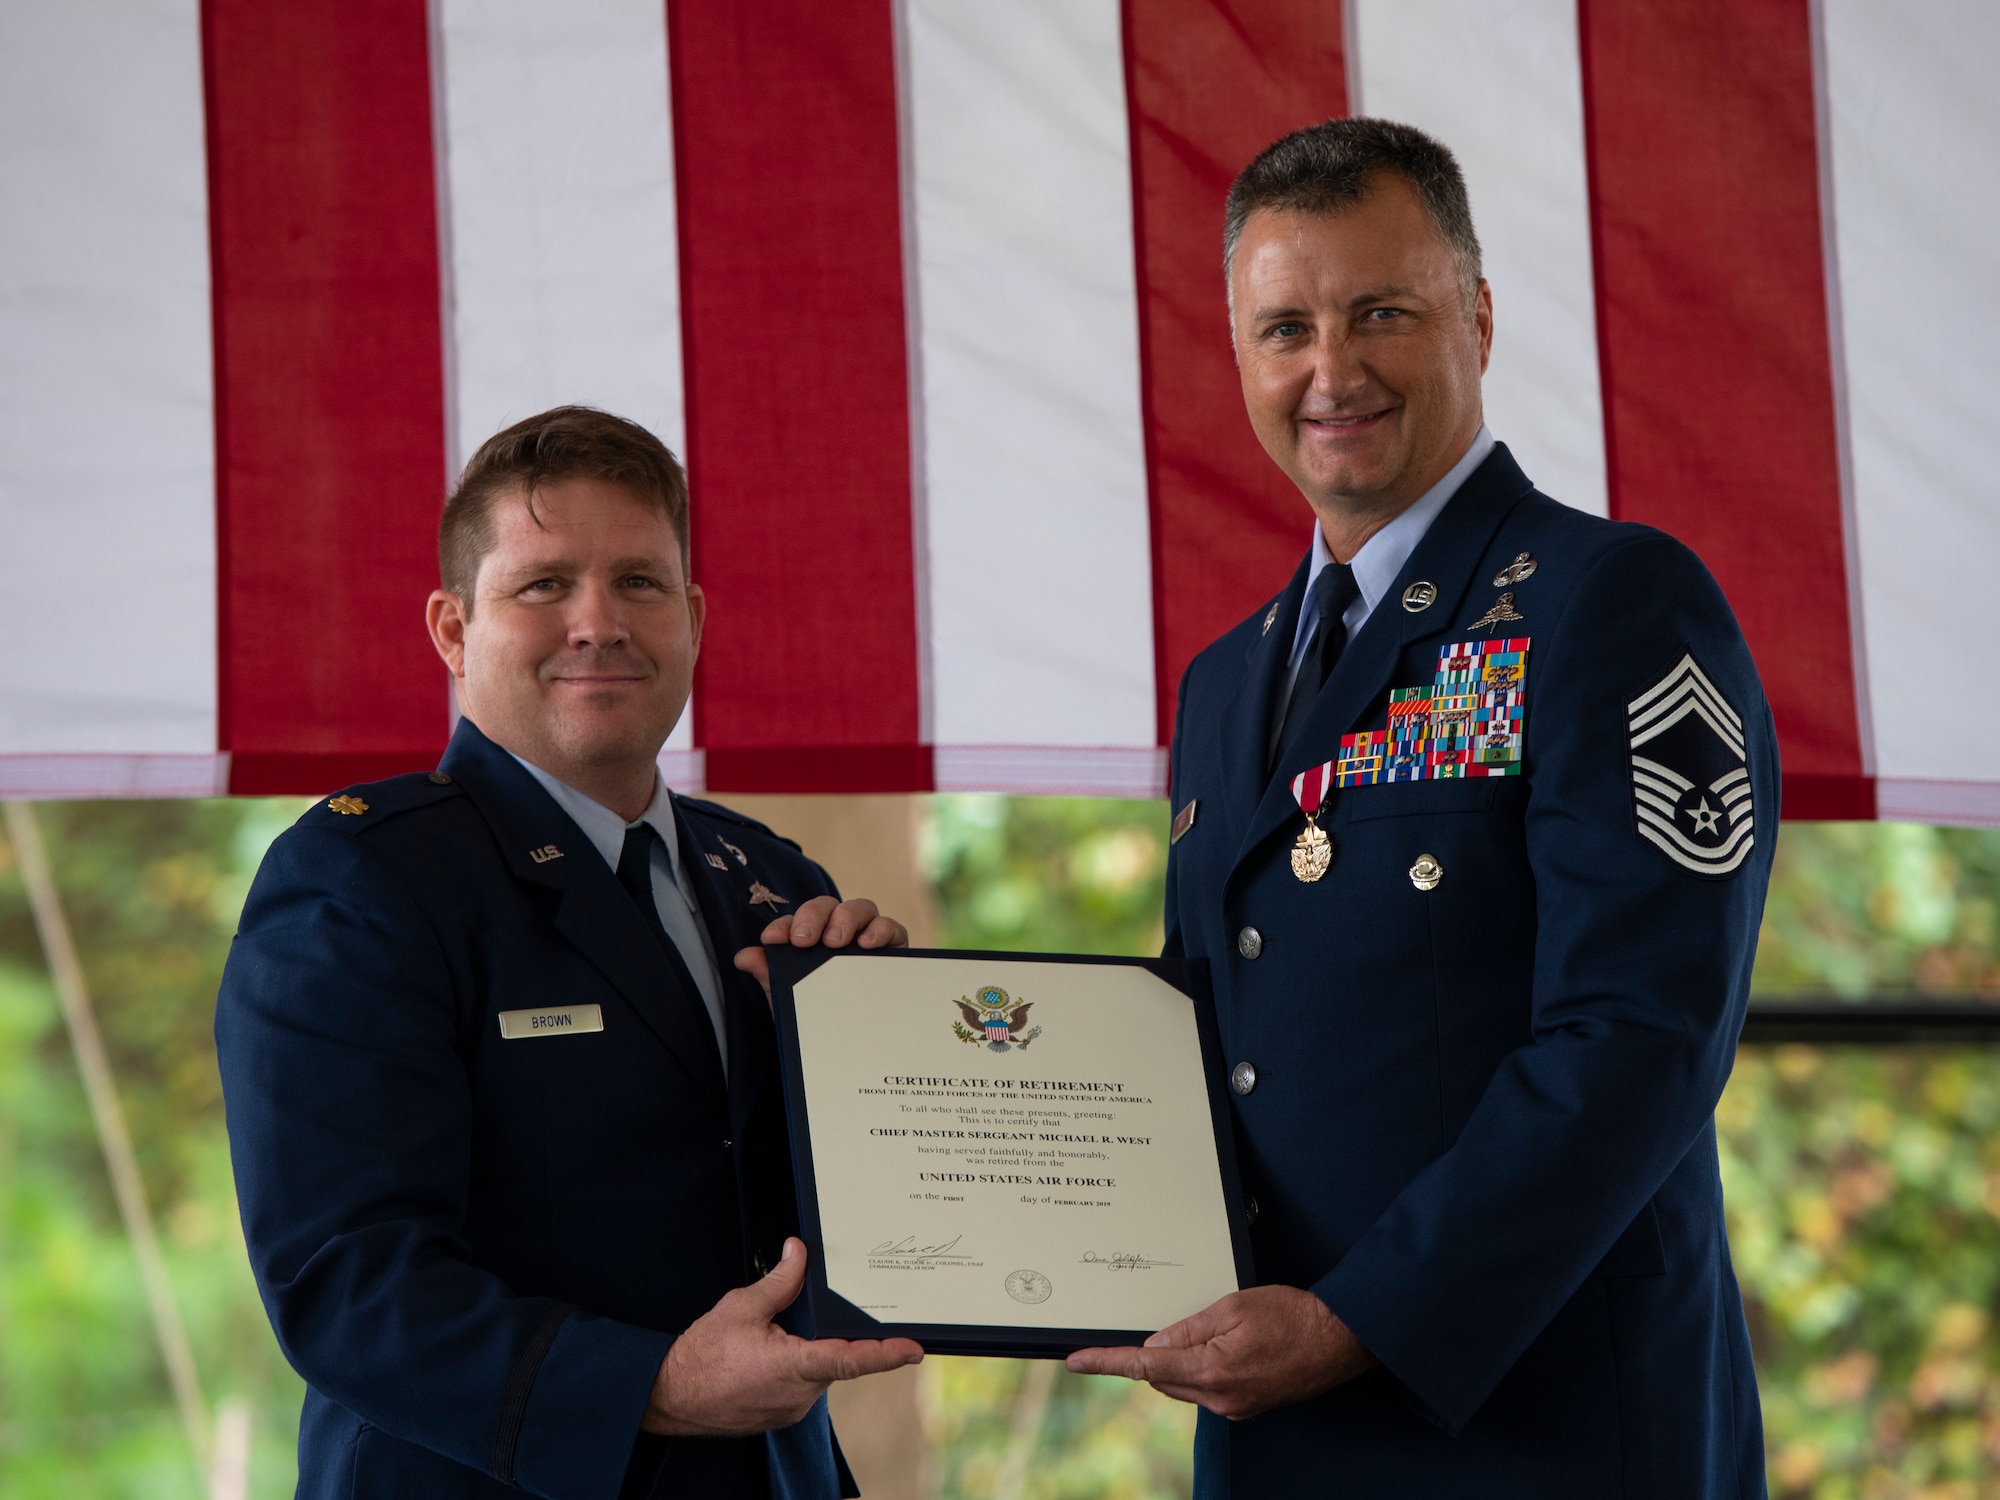 Maj. Gabriel Brown, left, director of operations with the Special Tactics Training Squadron, presents Chief Master Sgt. Michael West, a special tactics combat controller with the 24th Special Operations Wing, a certificate of retirement during a retirement ceremony at Hurlburt Field, Florida, Oct. 19, 2018.